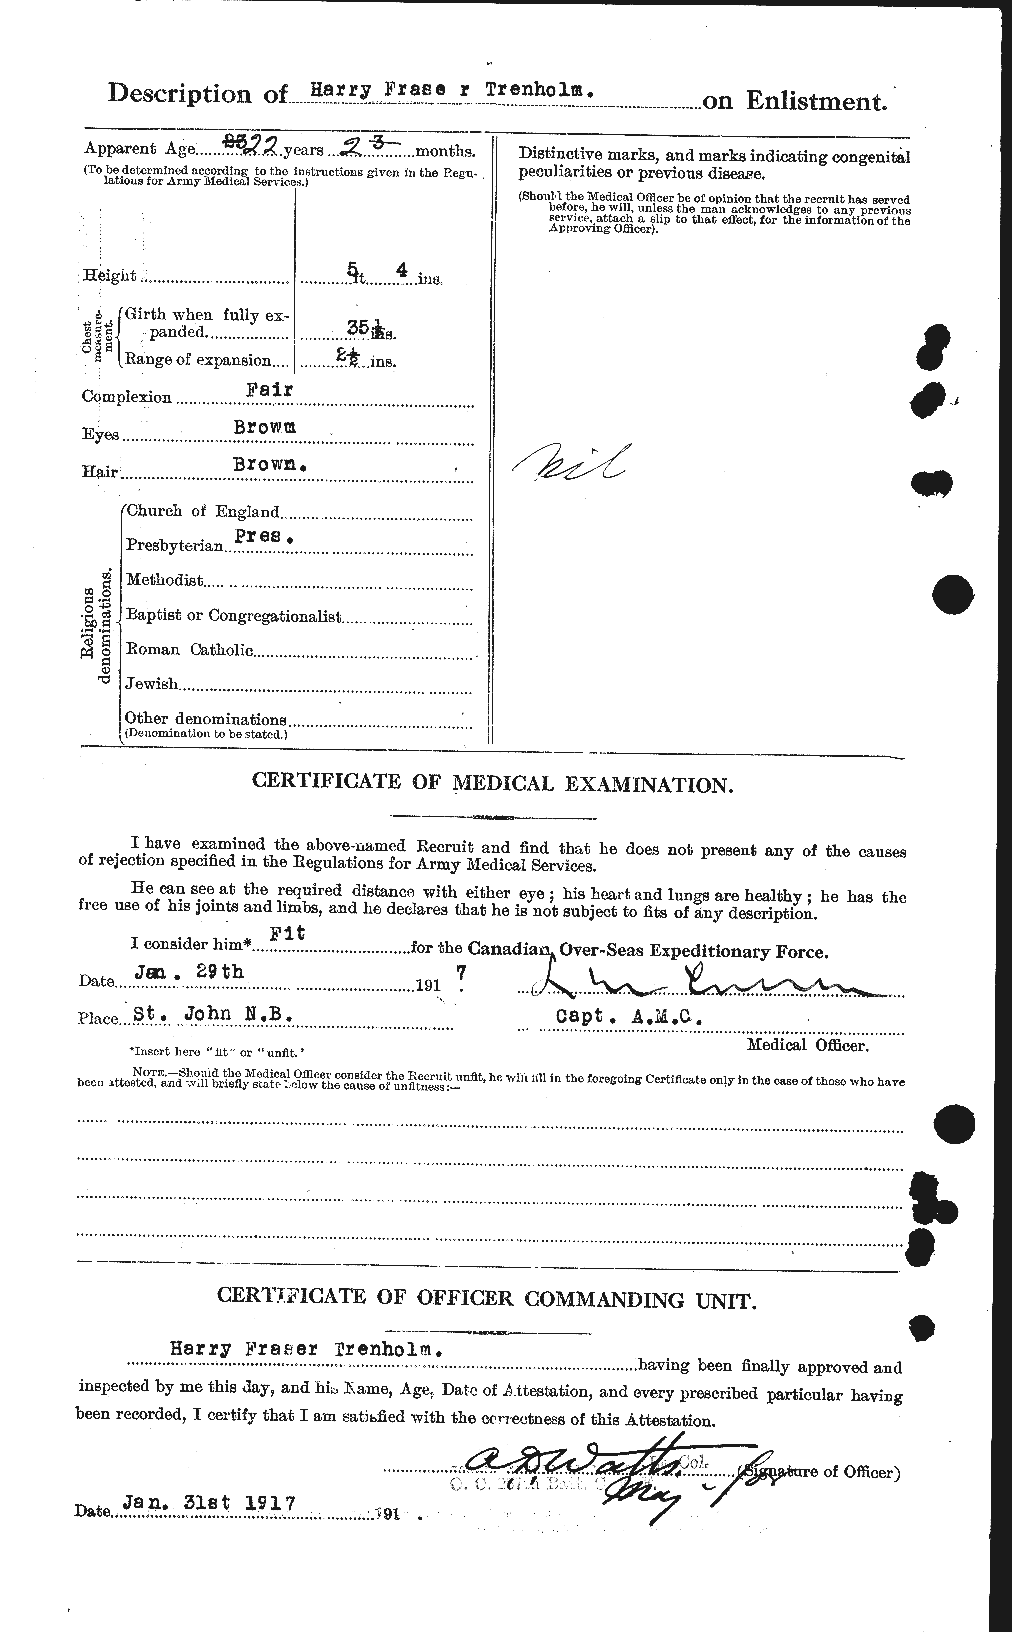 Personnel Records of the First World War - CEF 638458b